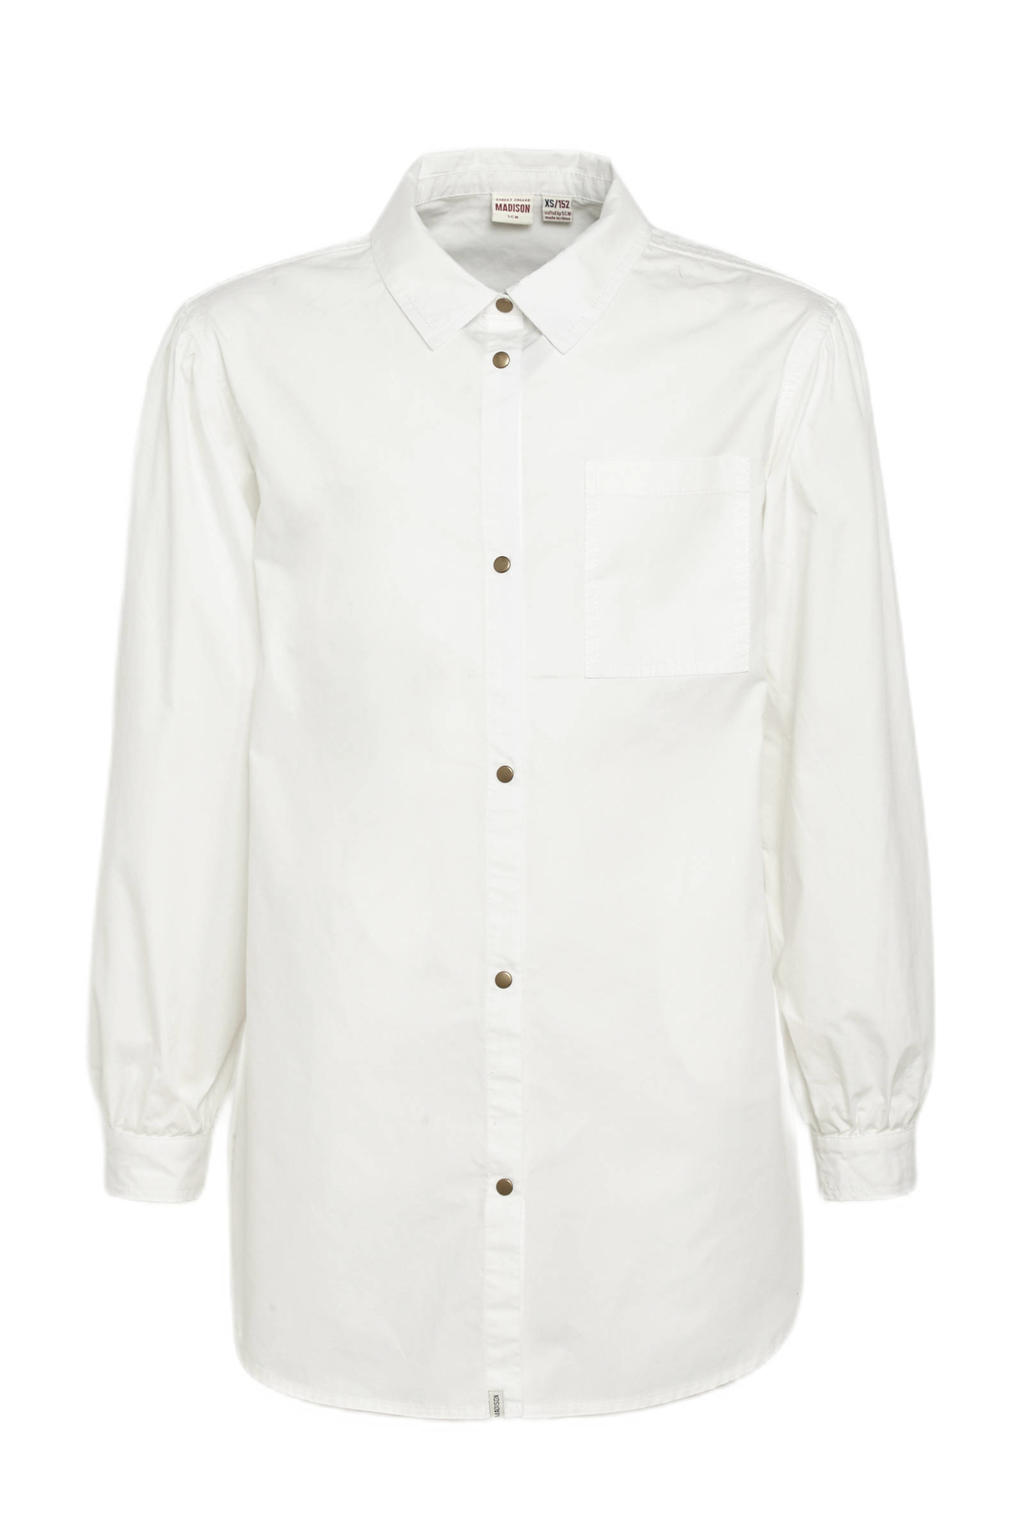 Street called Madison blouse offwhite